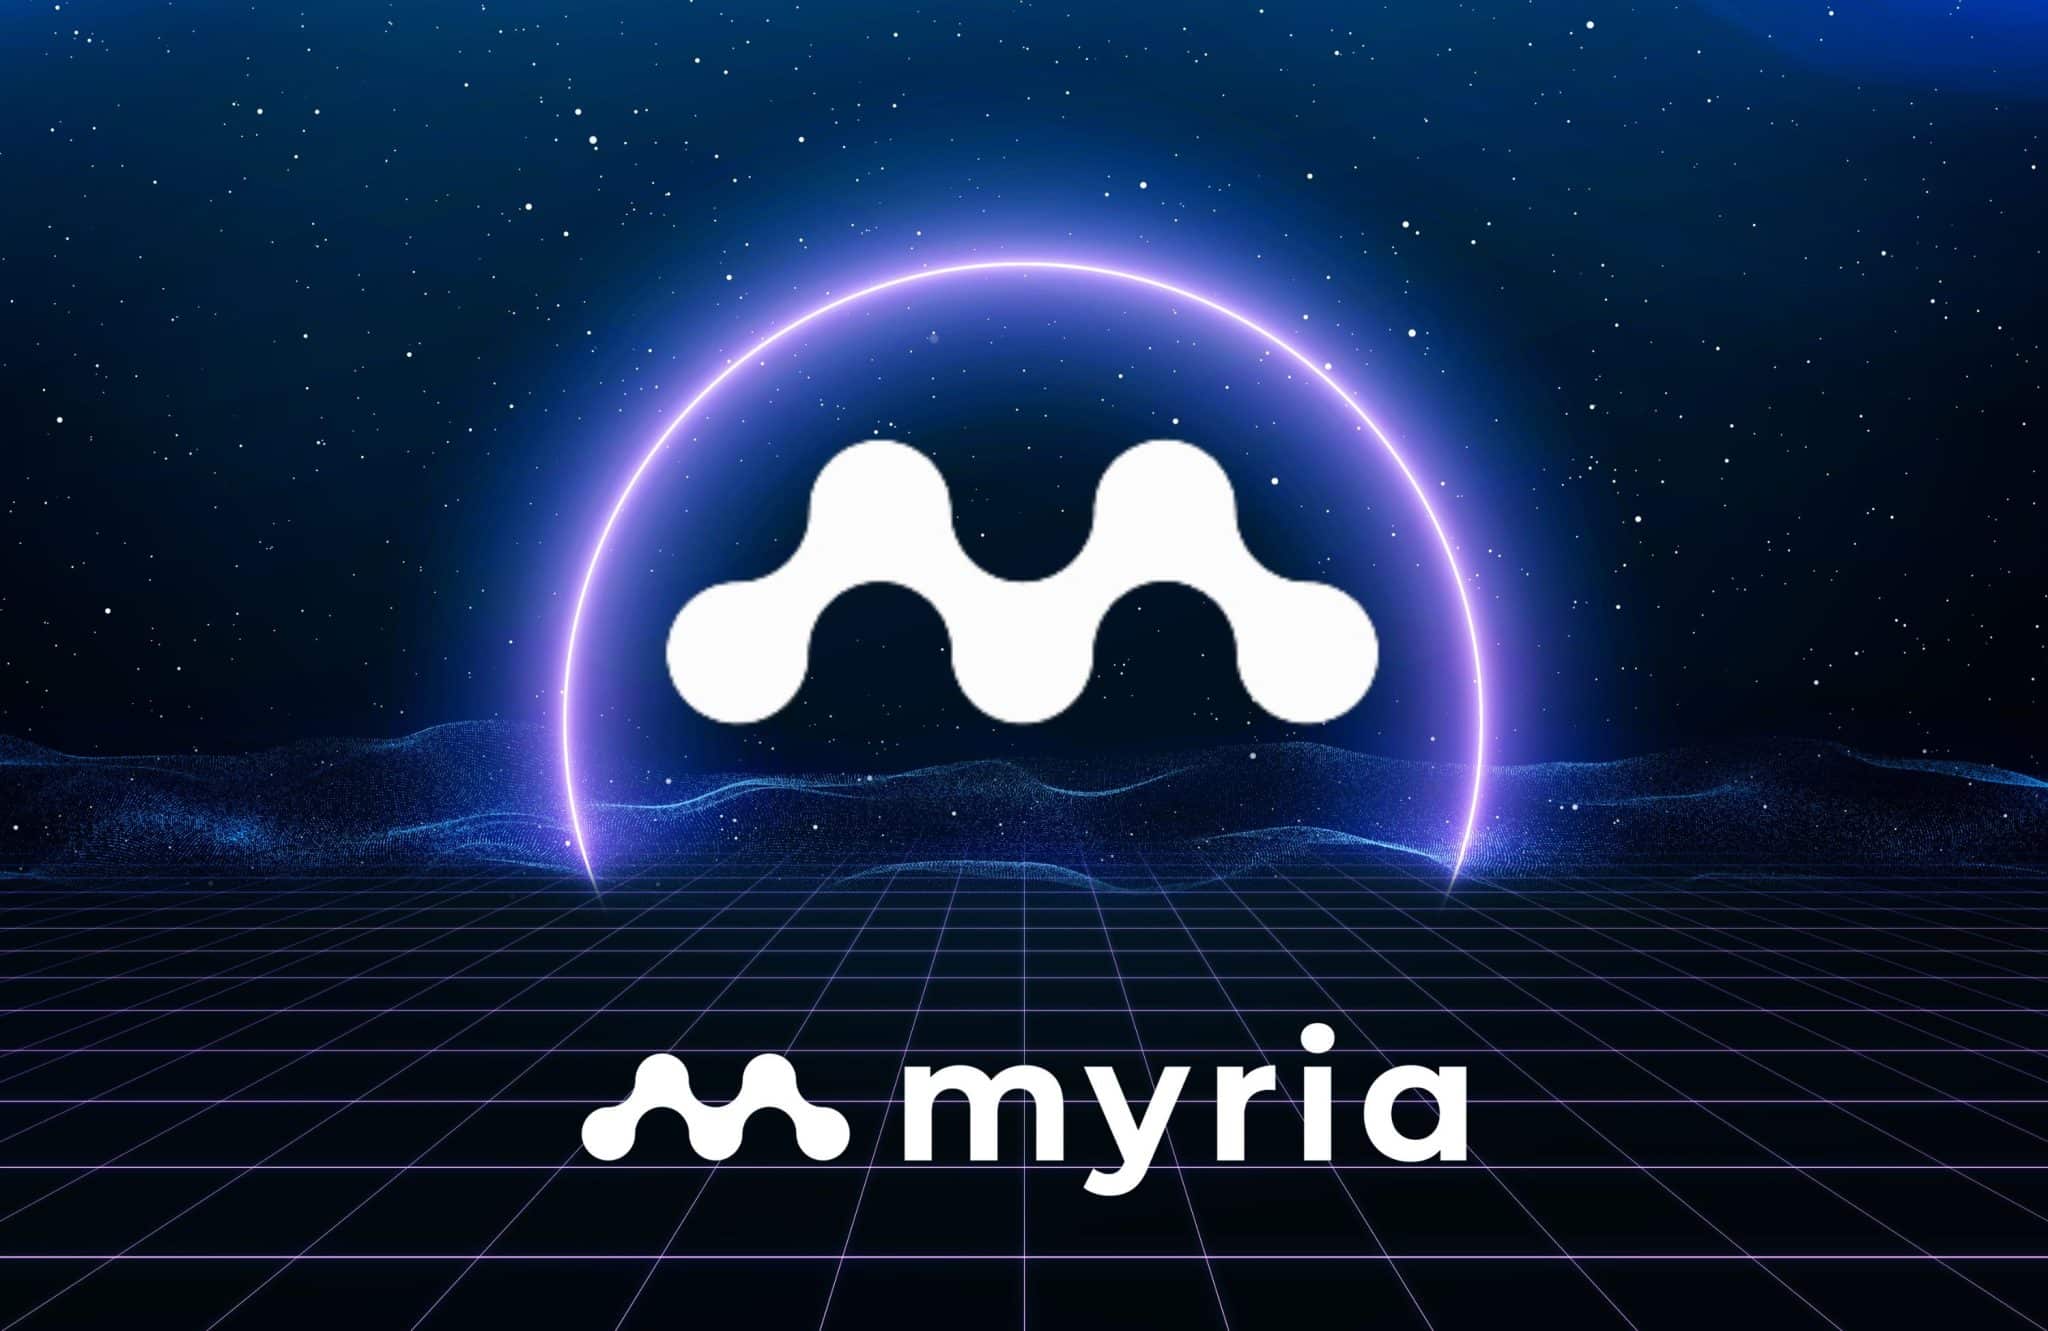 What is Myria Crypto? Boost tx speed with Myria's Layer 2 solution. Lightning-fast, gasless transactions with up to 9,000 TPS on Ethereum.